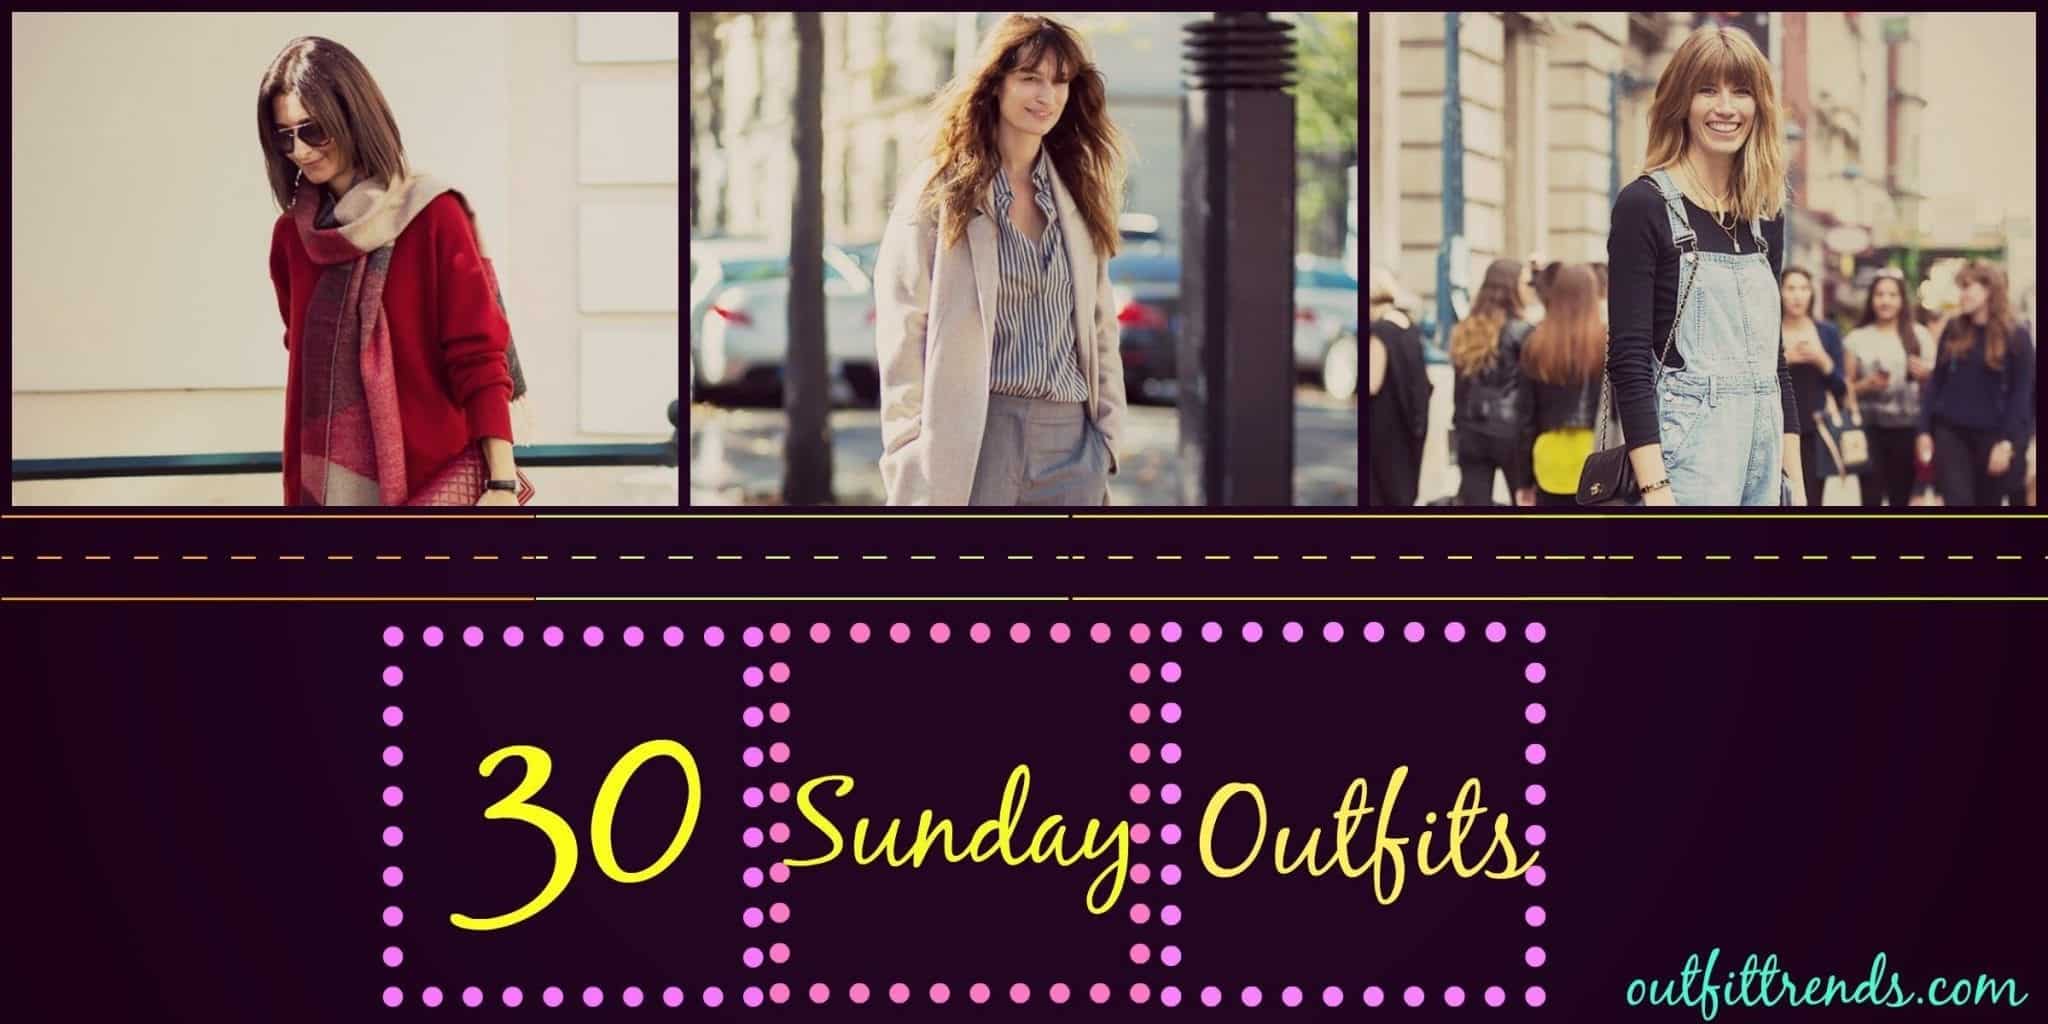 Cute Sunday Outfits Ideas - 30 Styles What to Wear on Sunday